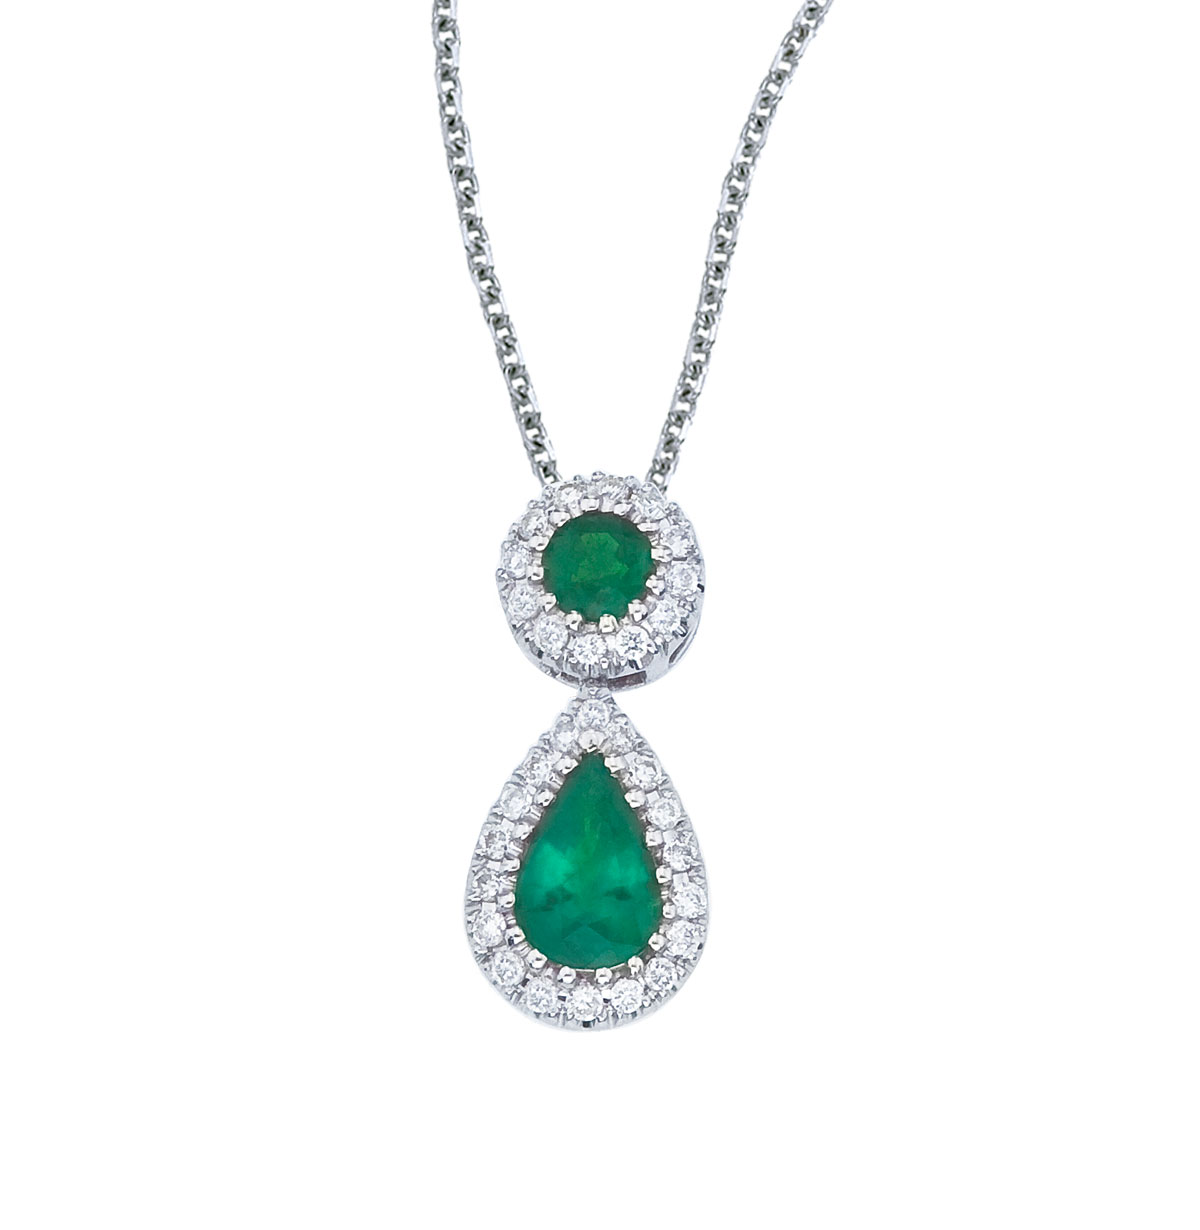 This beautiful 14k white gold pendant features a 6x4 mm emerald dangling from a 2.5 mm round emerald  all surrounded by .12 carats of shimmering diamonds.